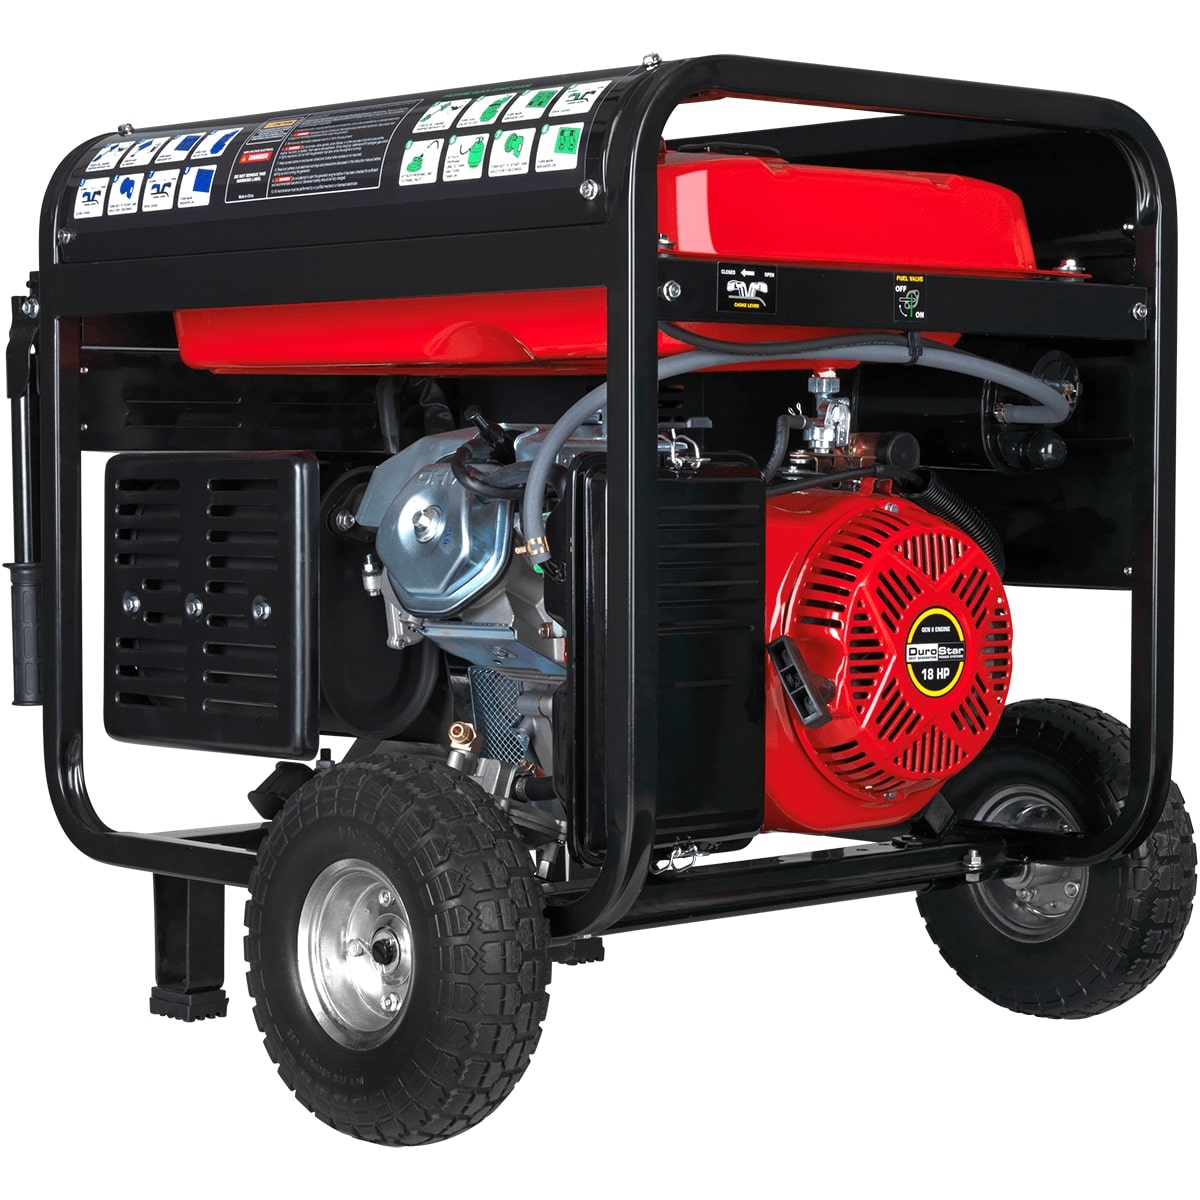 DuroStar DS10000EH 10,000W 439cc Dual Fuel Portable Generator w Electric Start Back View 2